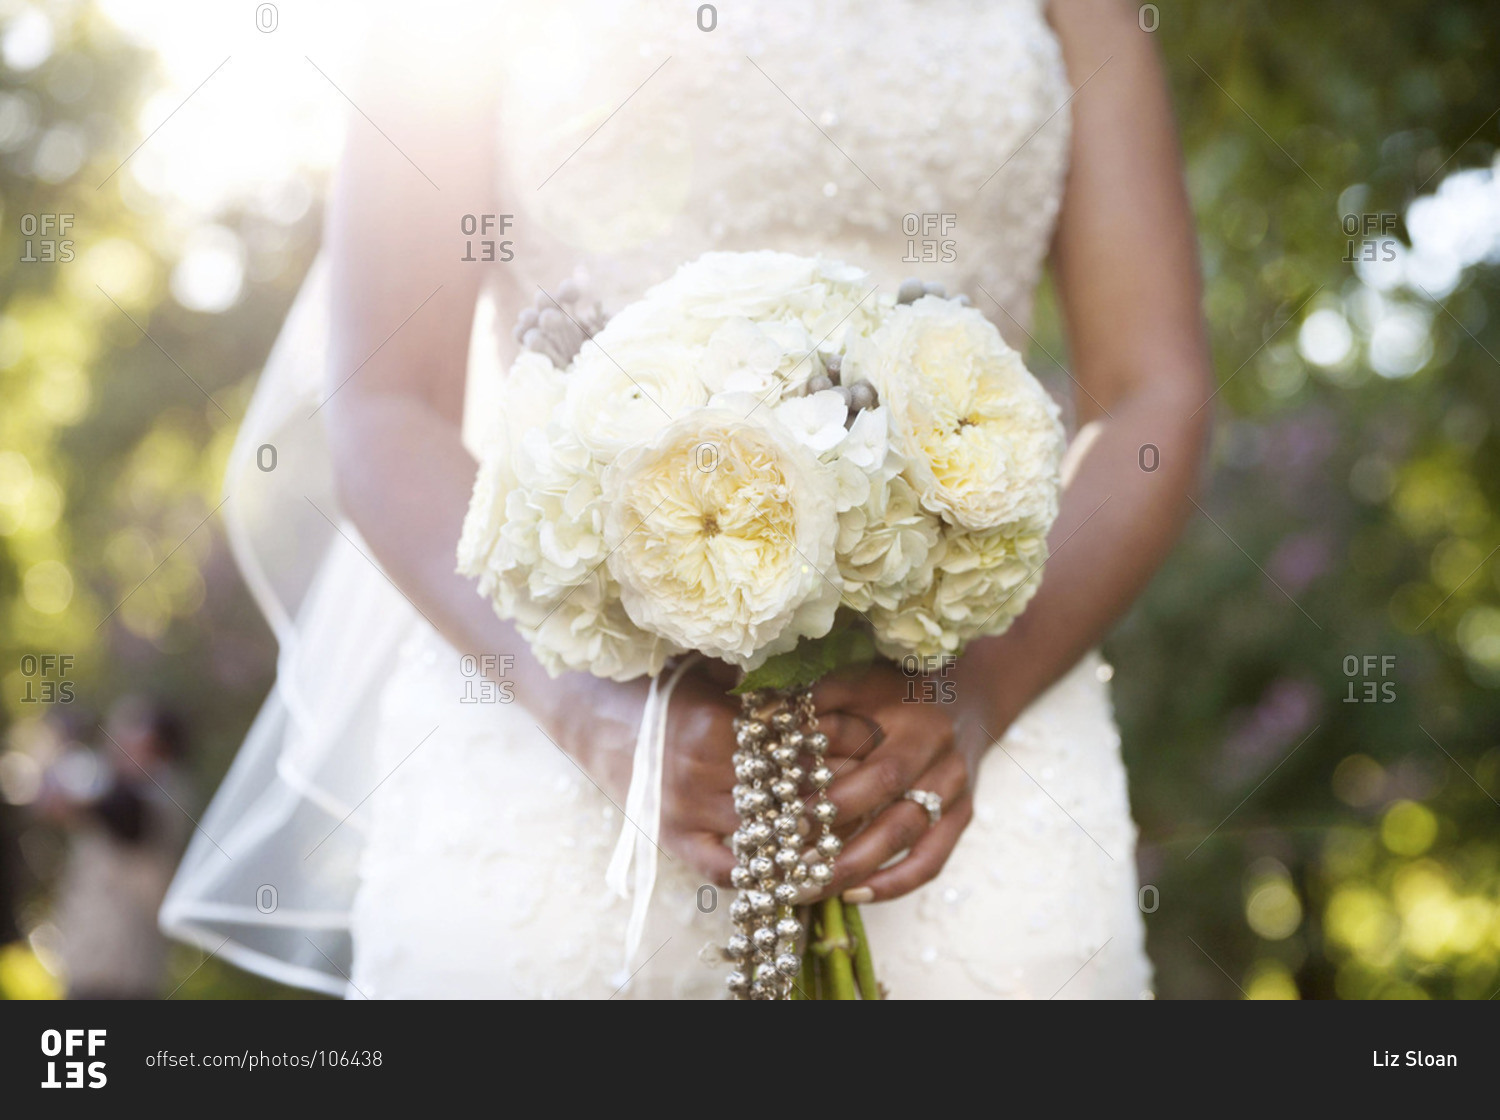 Mid section view of bride holding white bridal bouquet